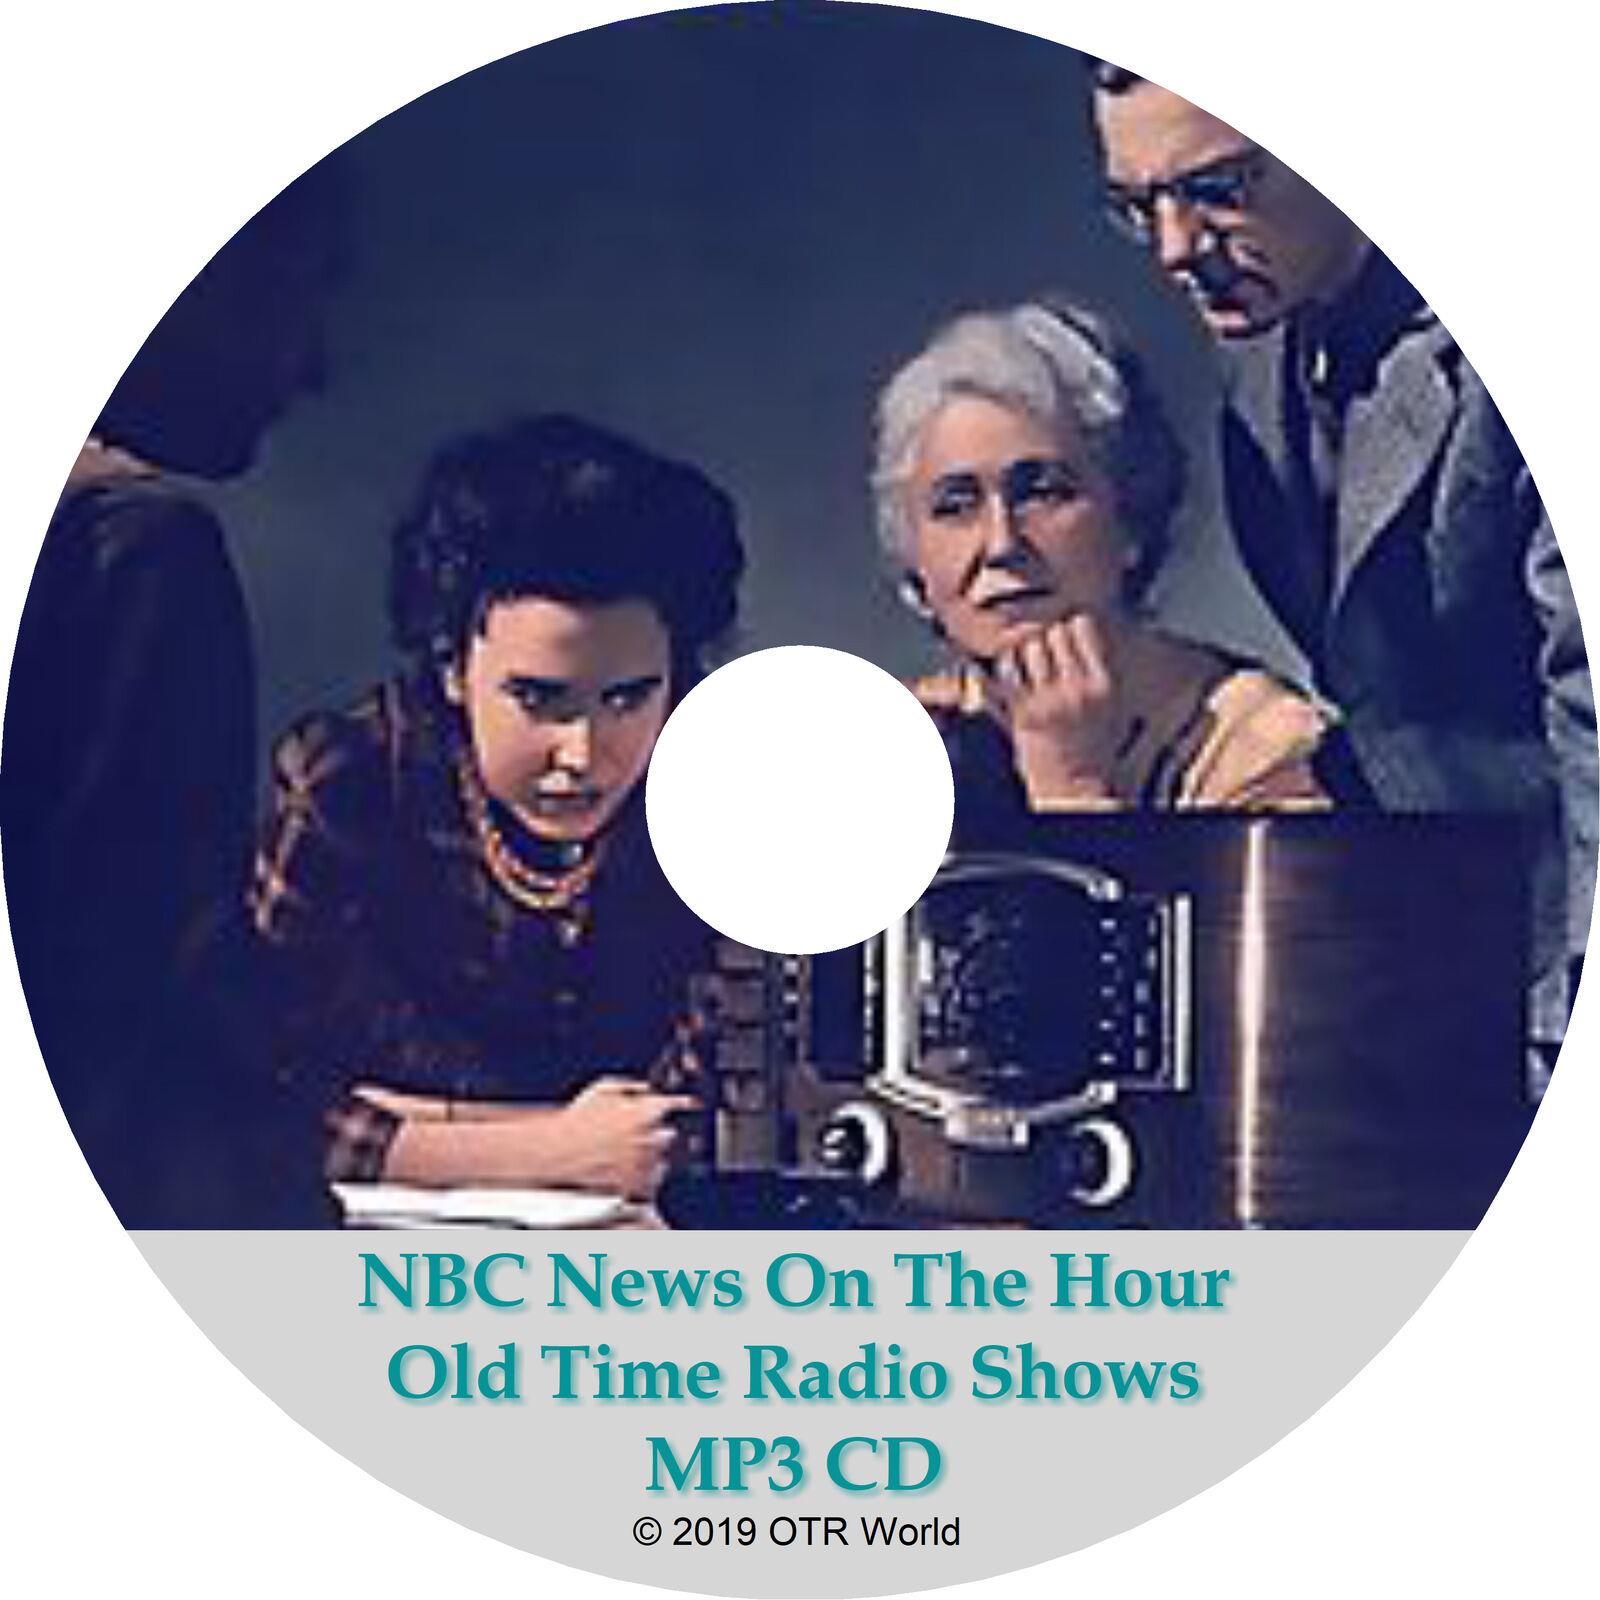 NBC News On The Hour Old Time Radio Shows 2 Episodes On MP3 CD-R OTR OTRS